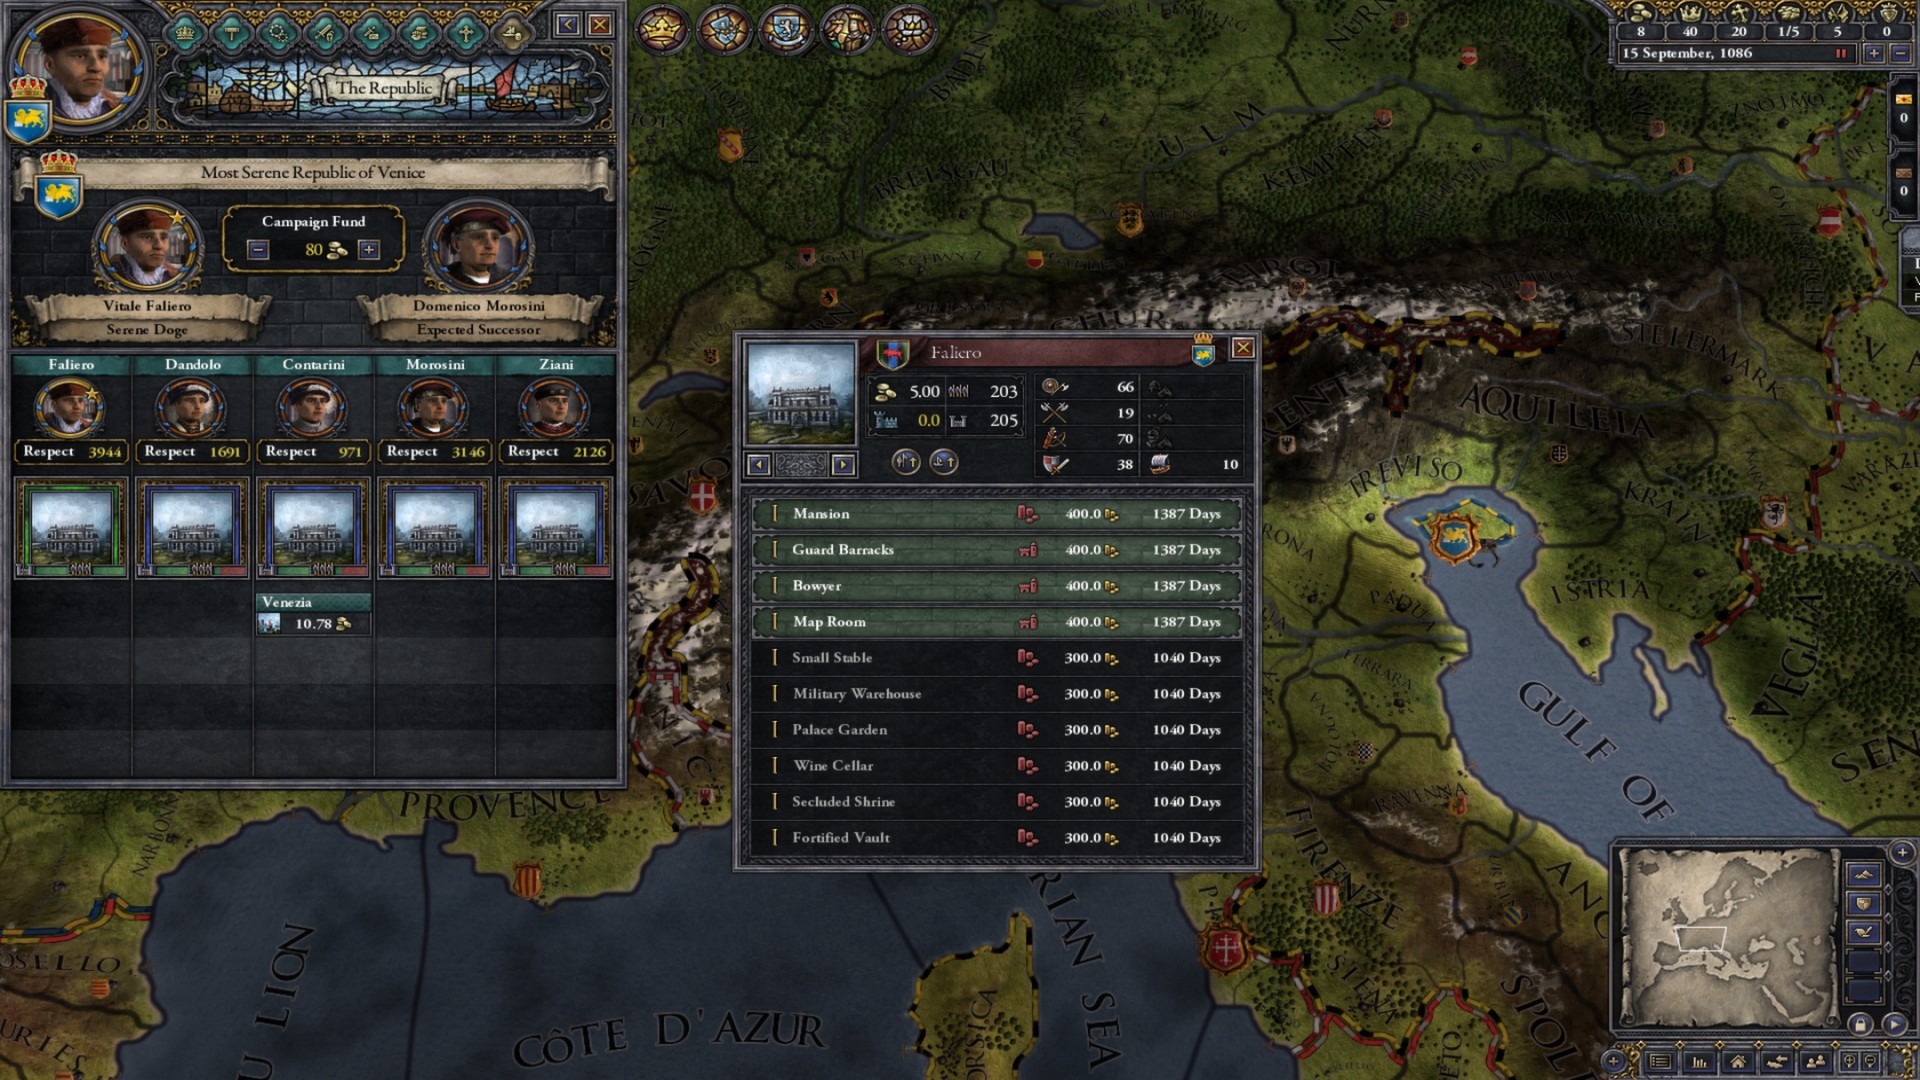 Expansion - Crusader Kings II: The Republic Featured Screenshot #1